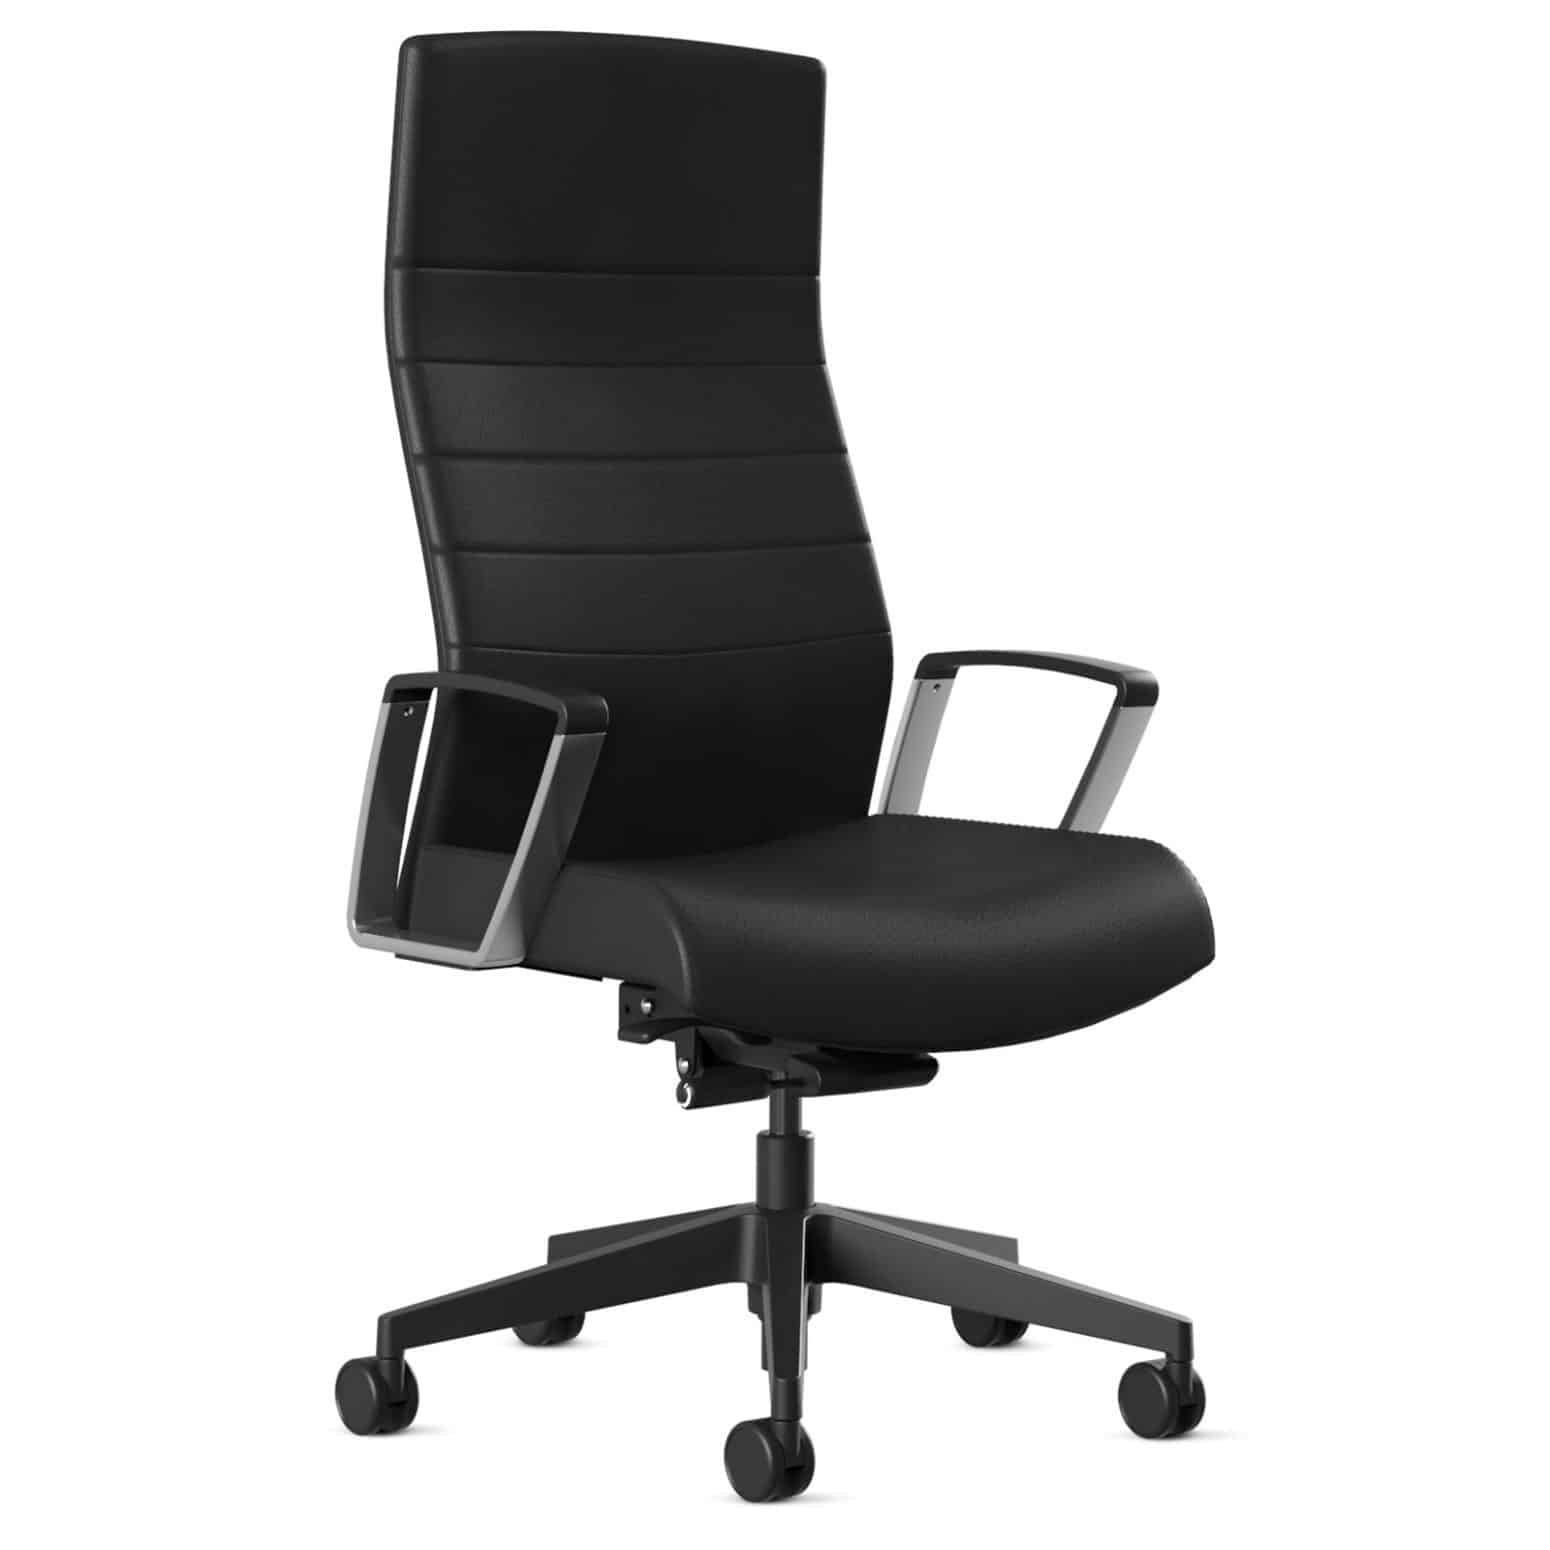 Enhances comfort and reduce back pain with the 9To5 @Once Chair